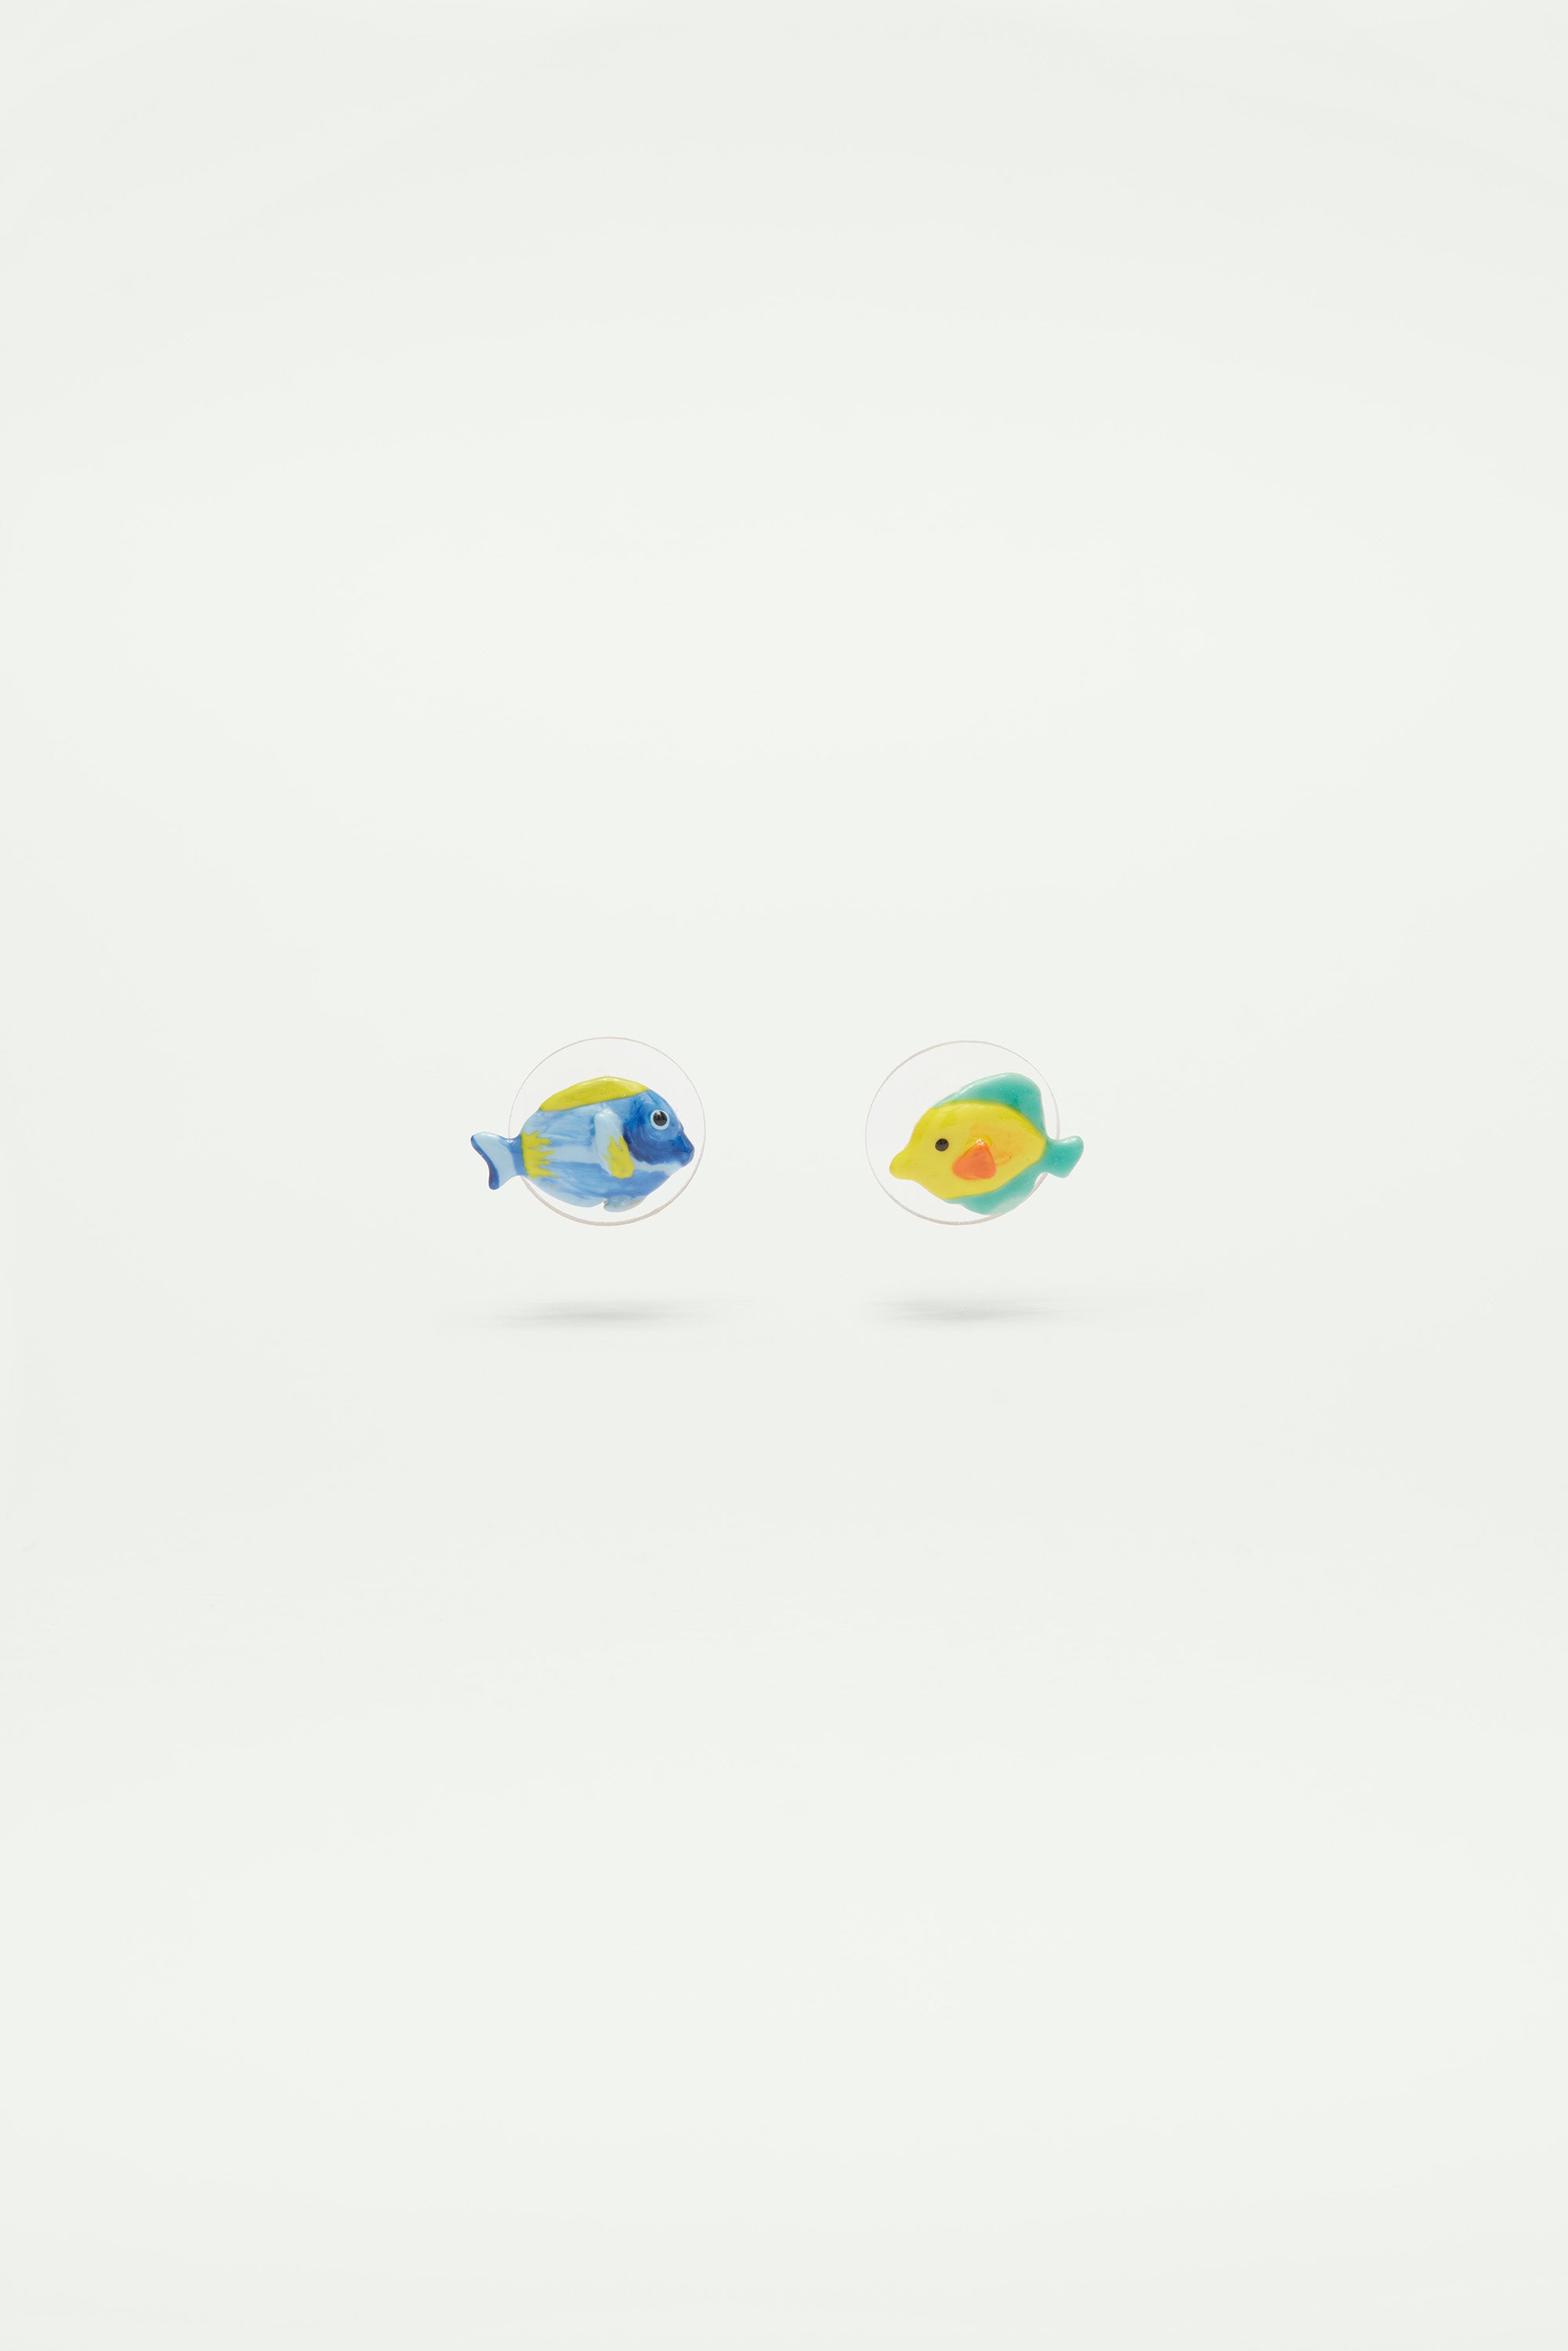 Asymmetrical blue fish and yellow fish post earrings